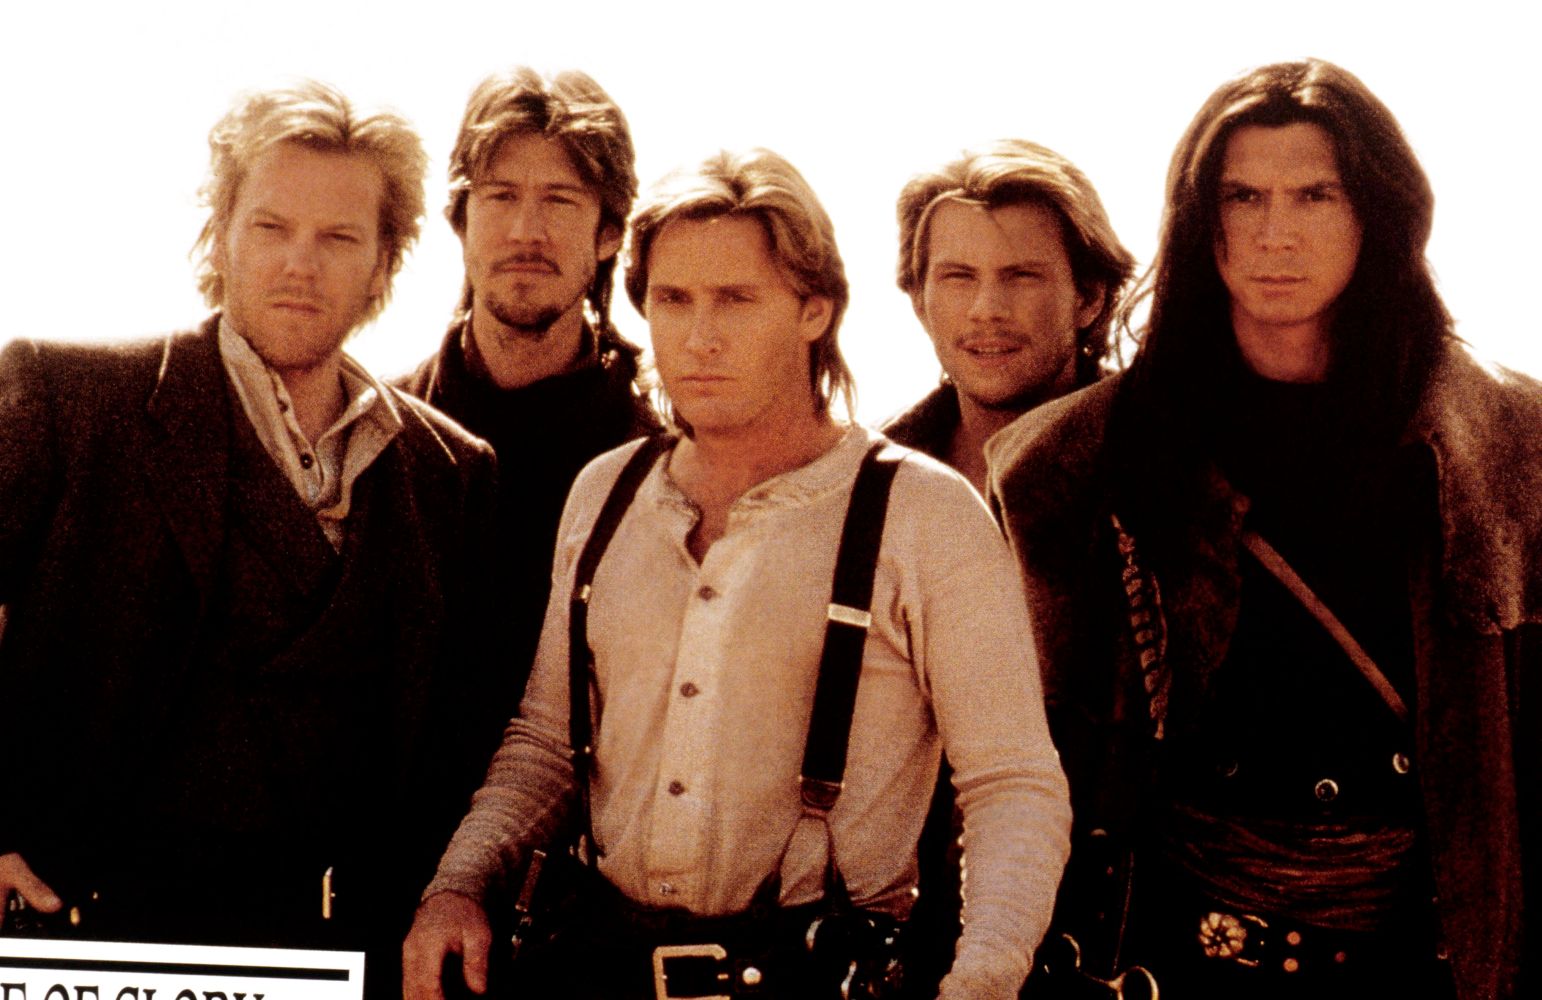 <p>After years of back-to-back recording and touring, the guys took a much-needed hiatus. During this time, Jon kept busy writing the soundtrack to the film <em>Young Guns II</em> which starred Emilio Estevez, Keifer Sutherland, Lou Diamond Phillips, and Christian Slater.</p> <p>Jon’s power ballad for the film, “Blaze of Glory” remains a staple of the band’s live show, despite being Jon’s first solo release. Not content to rest on his laurels, Richie Sambora also released his debut solo album at this time, <em>Stranger In This Town</em>.</p>